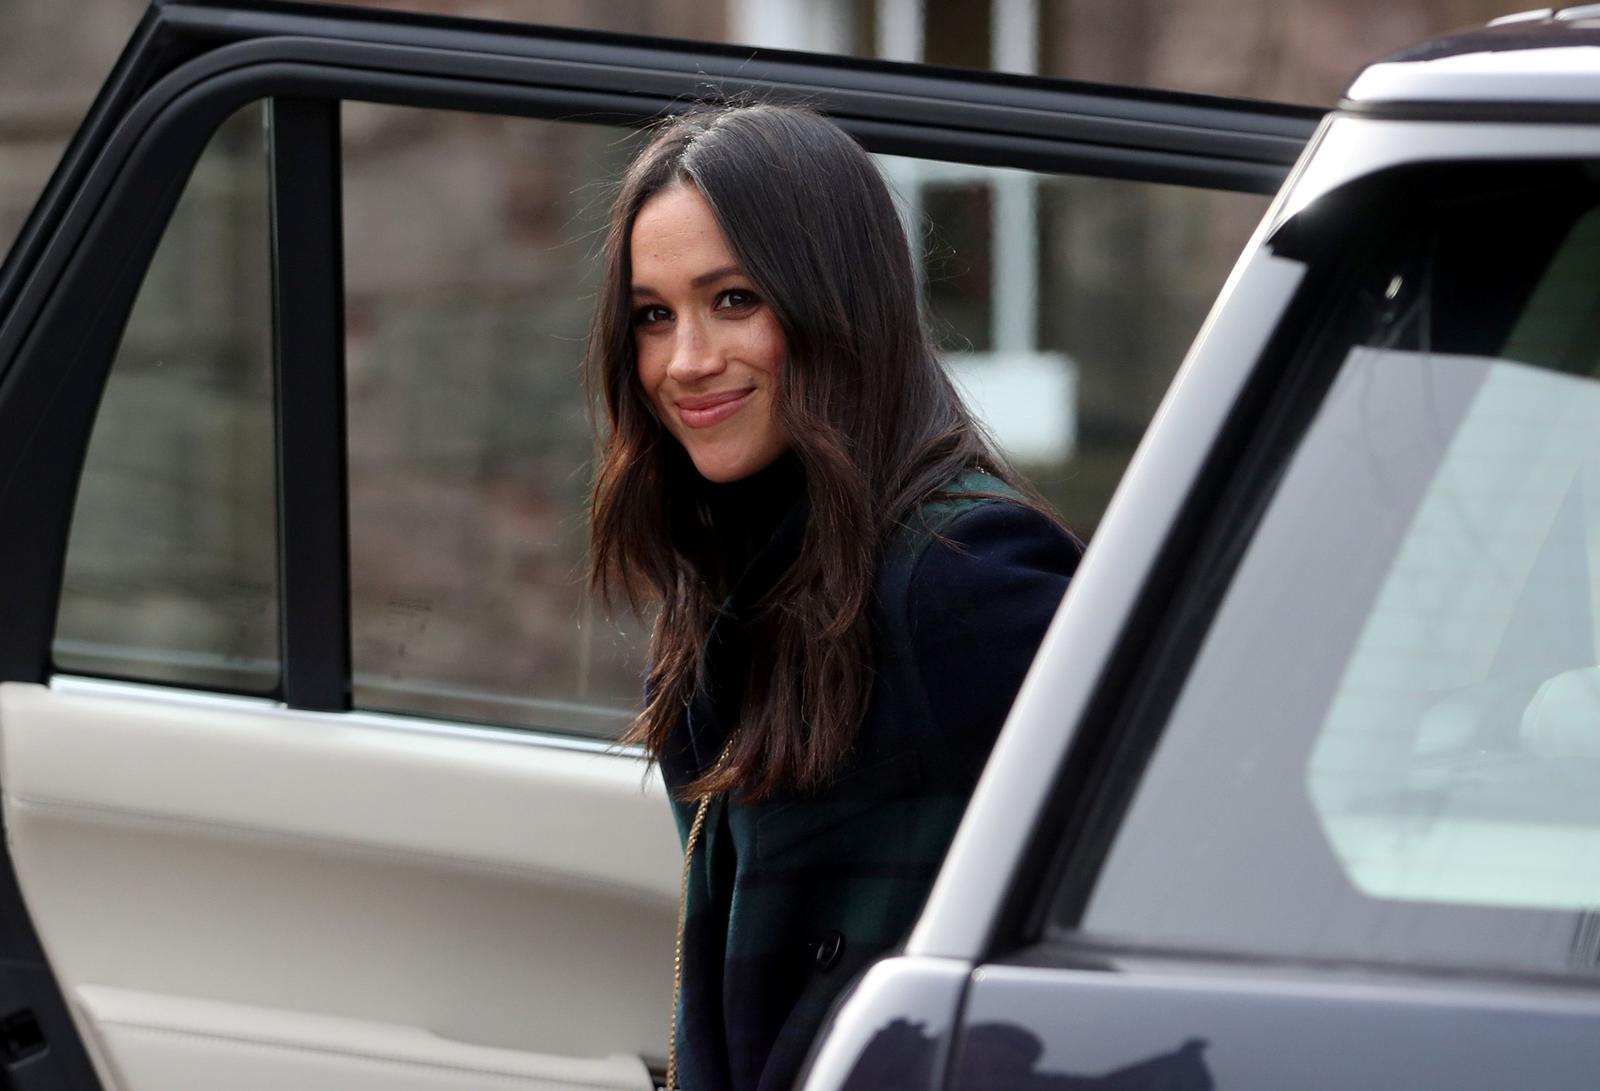 Meghan Markle, the fiancee of Britain’s Prince Harry, arrives for a walkabout on the esplanade at Edinburgh Castle